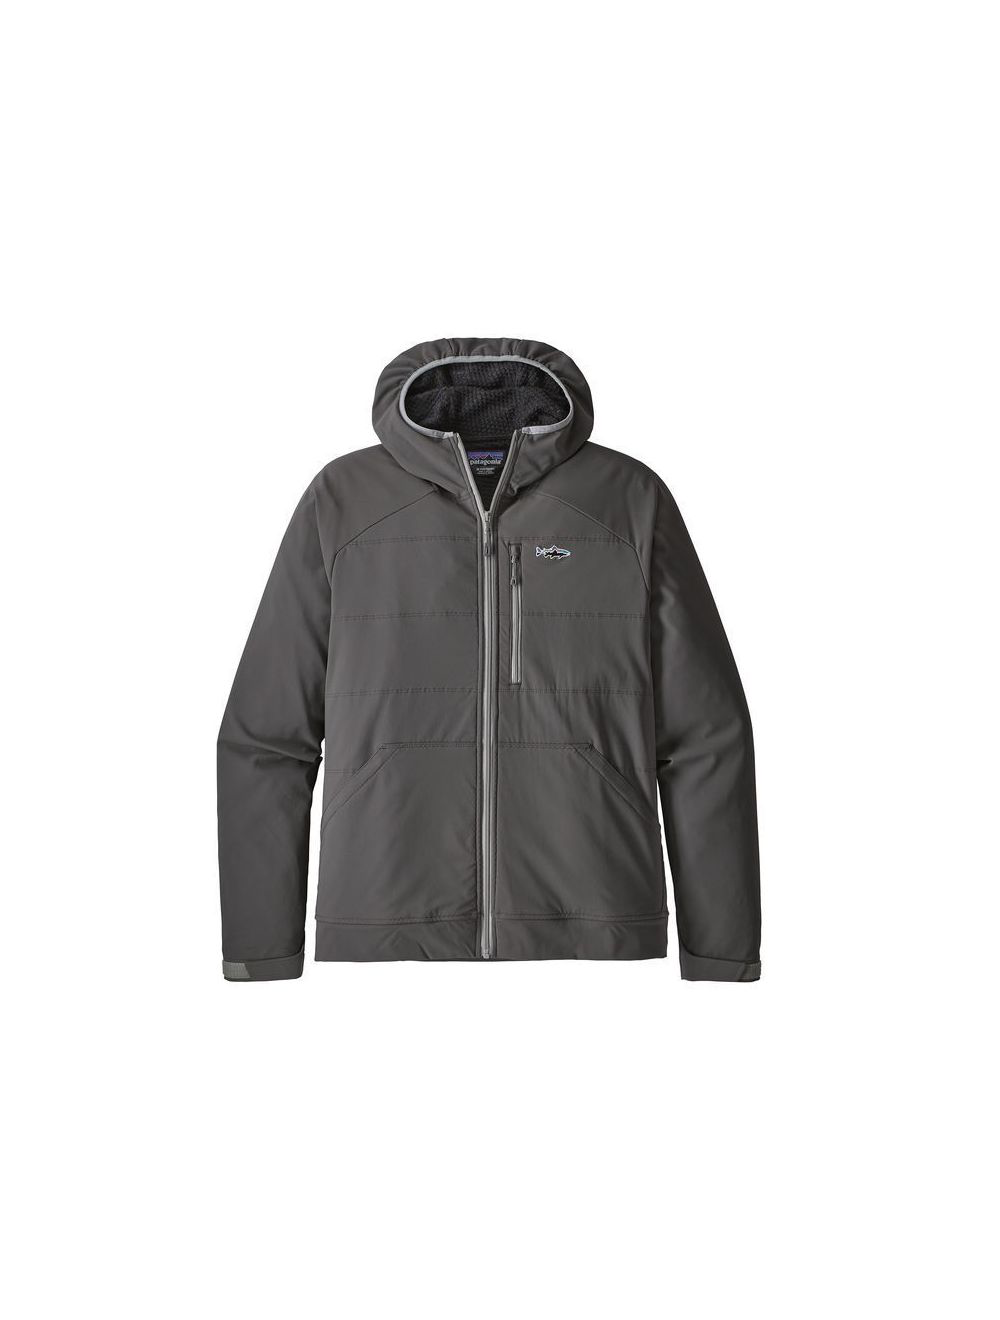 Patagonia M's Snap-Dry Hoody - Forge Grey - Small